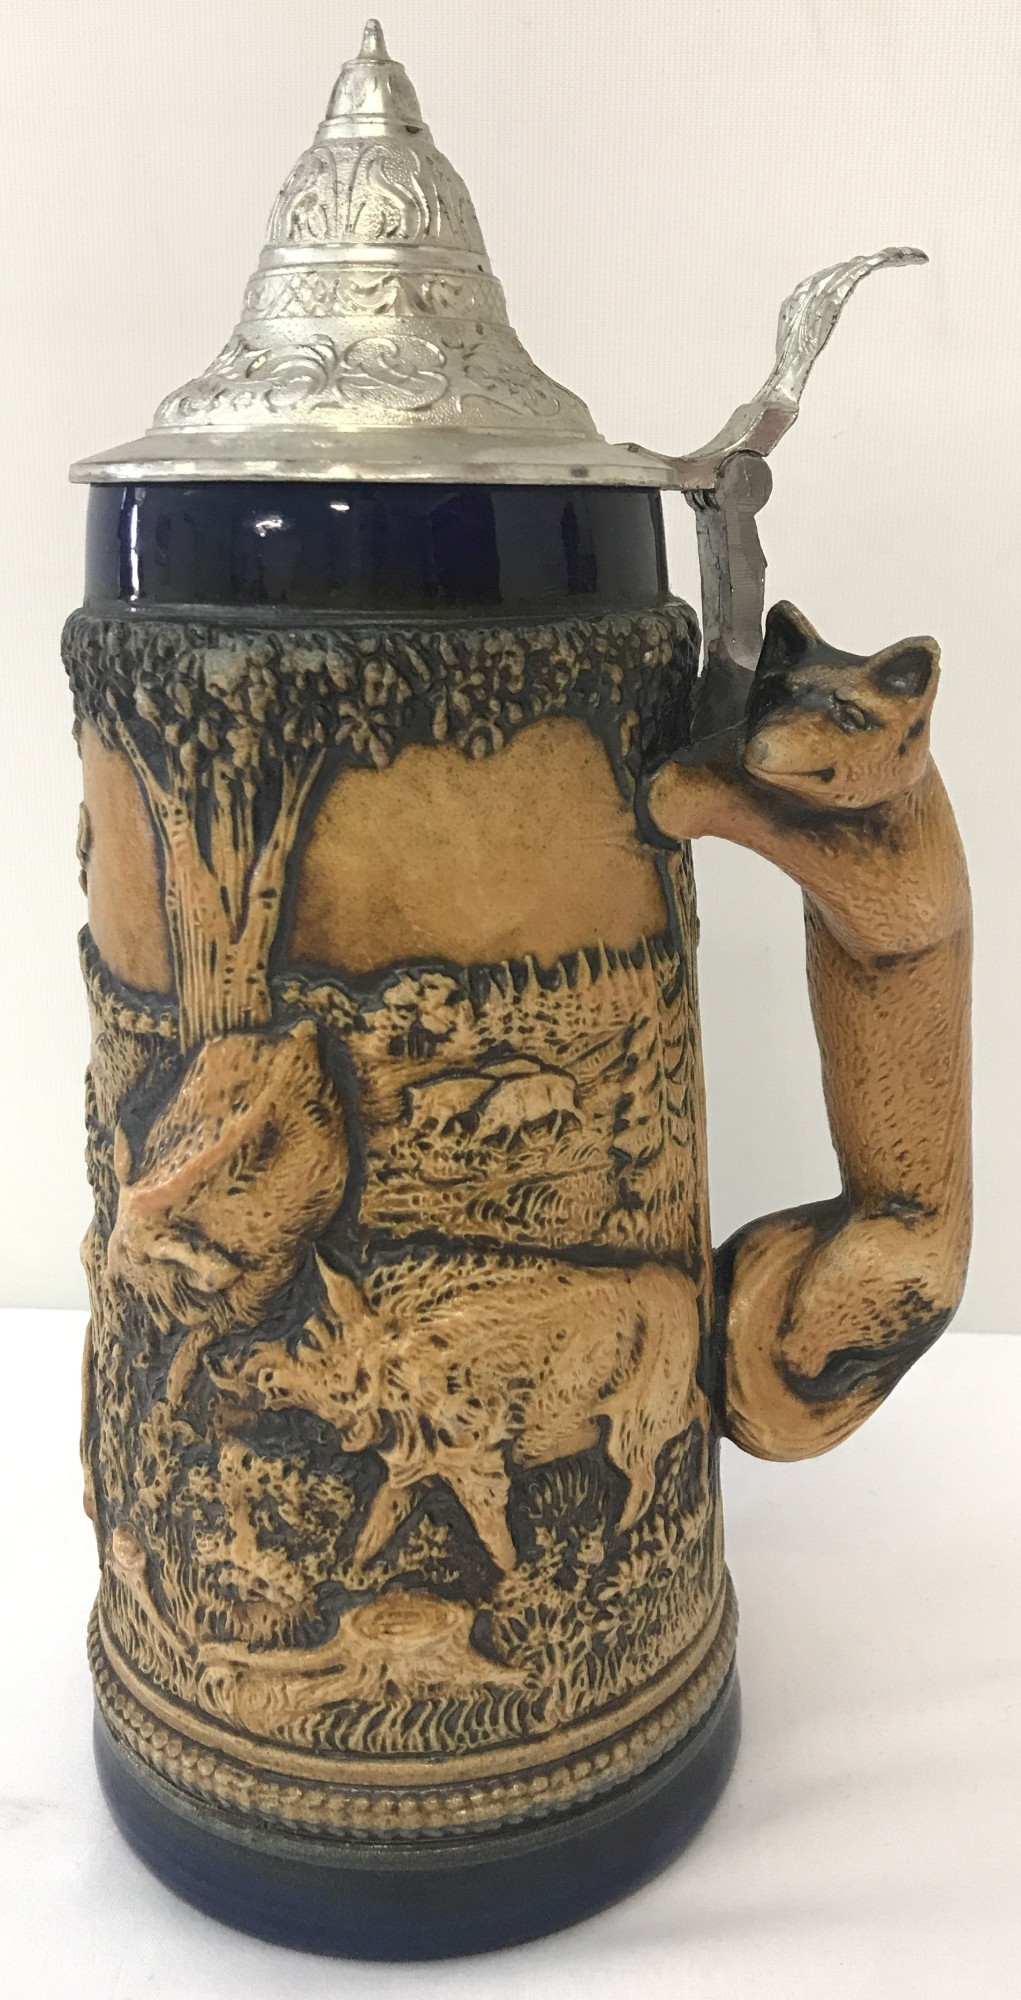 A large ceramic lidded stein with animal scene and fox shaped handle.